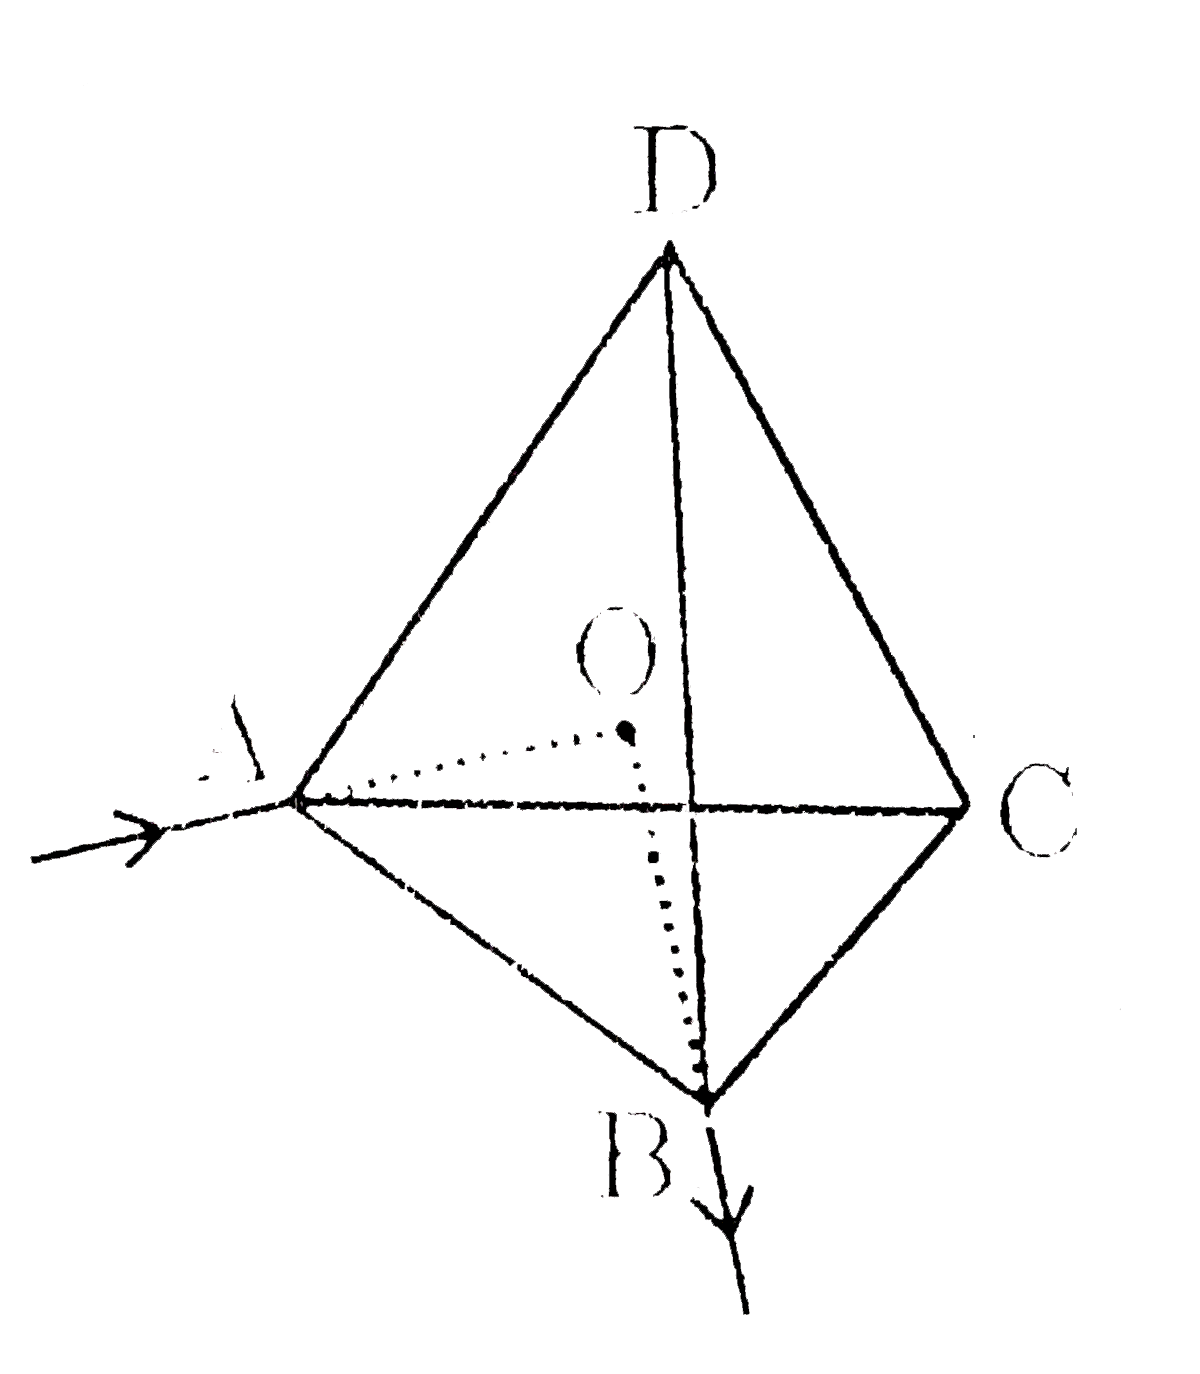 A regular tetrahedron frame is made up of homogeneous resitance wire of uniform cross section. Current I enters vertex A through a long, straight wire directed towards the centre O of the tetrahedron and is conducted away through vertex B in the same way, as illustrated in the figure. Choose CORRECT statement (s)